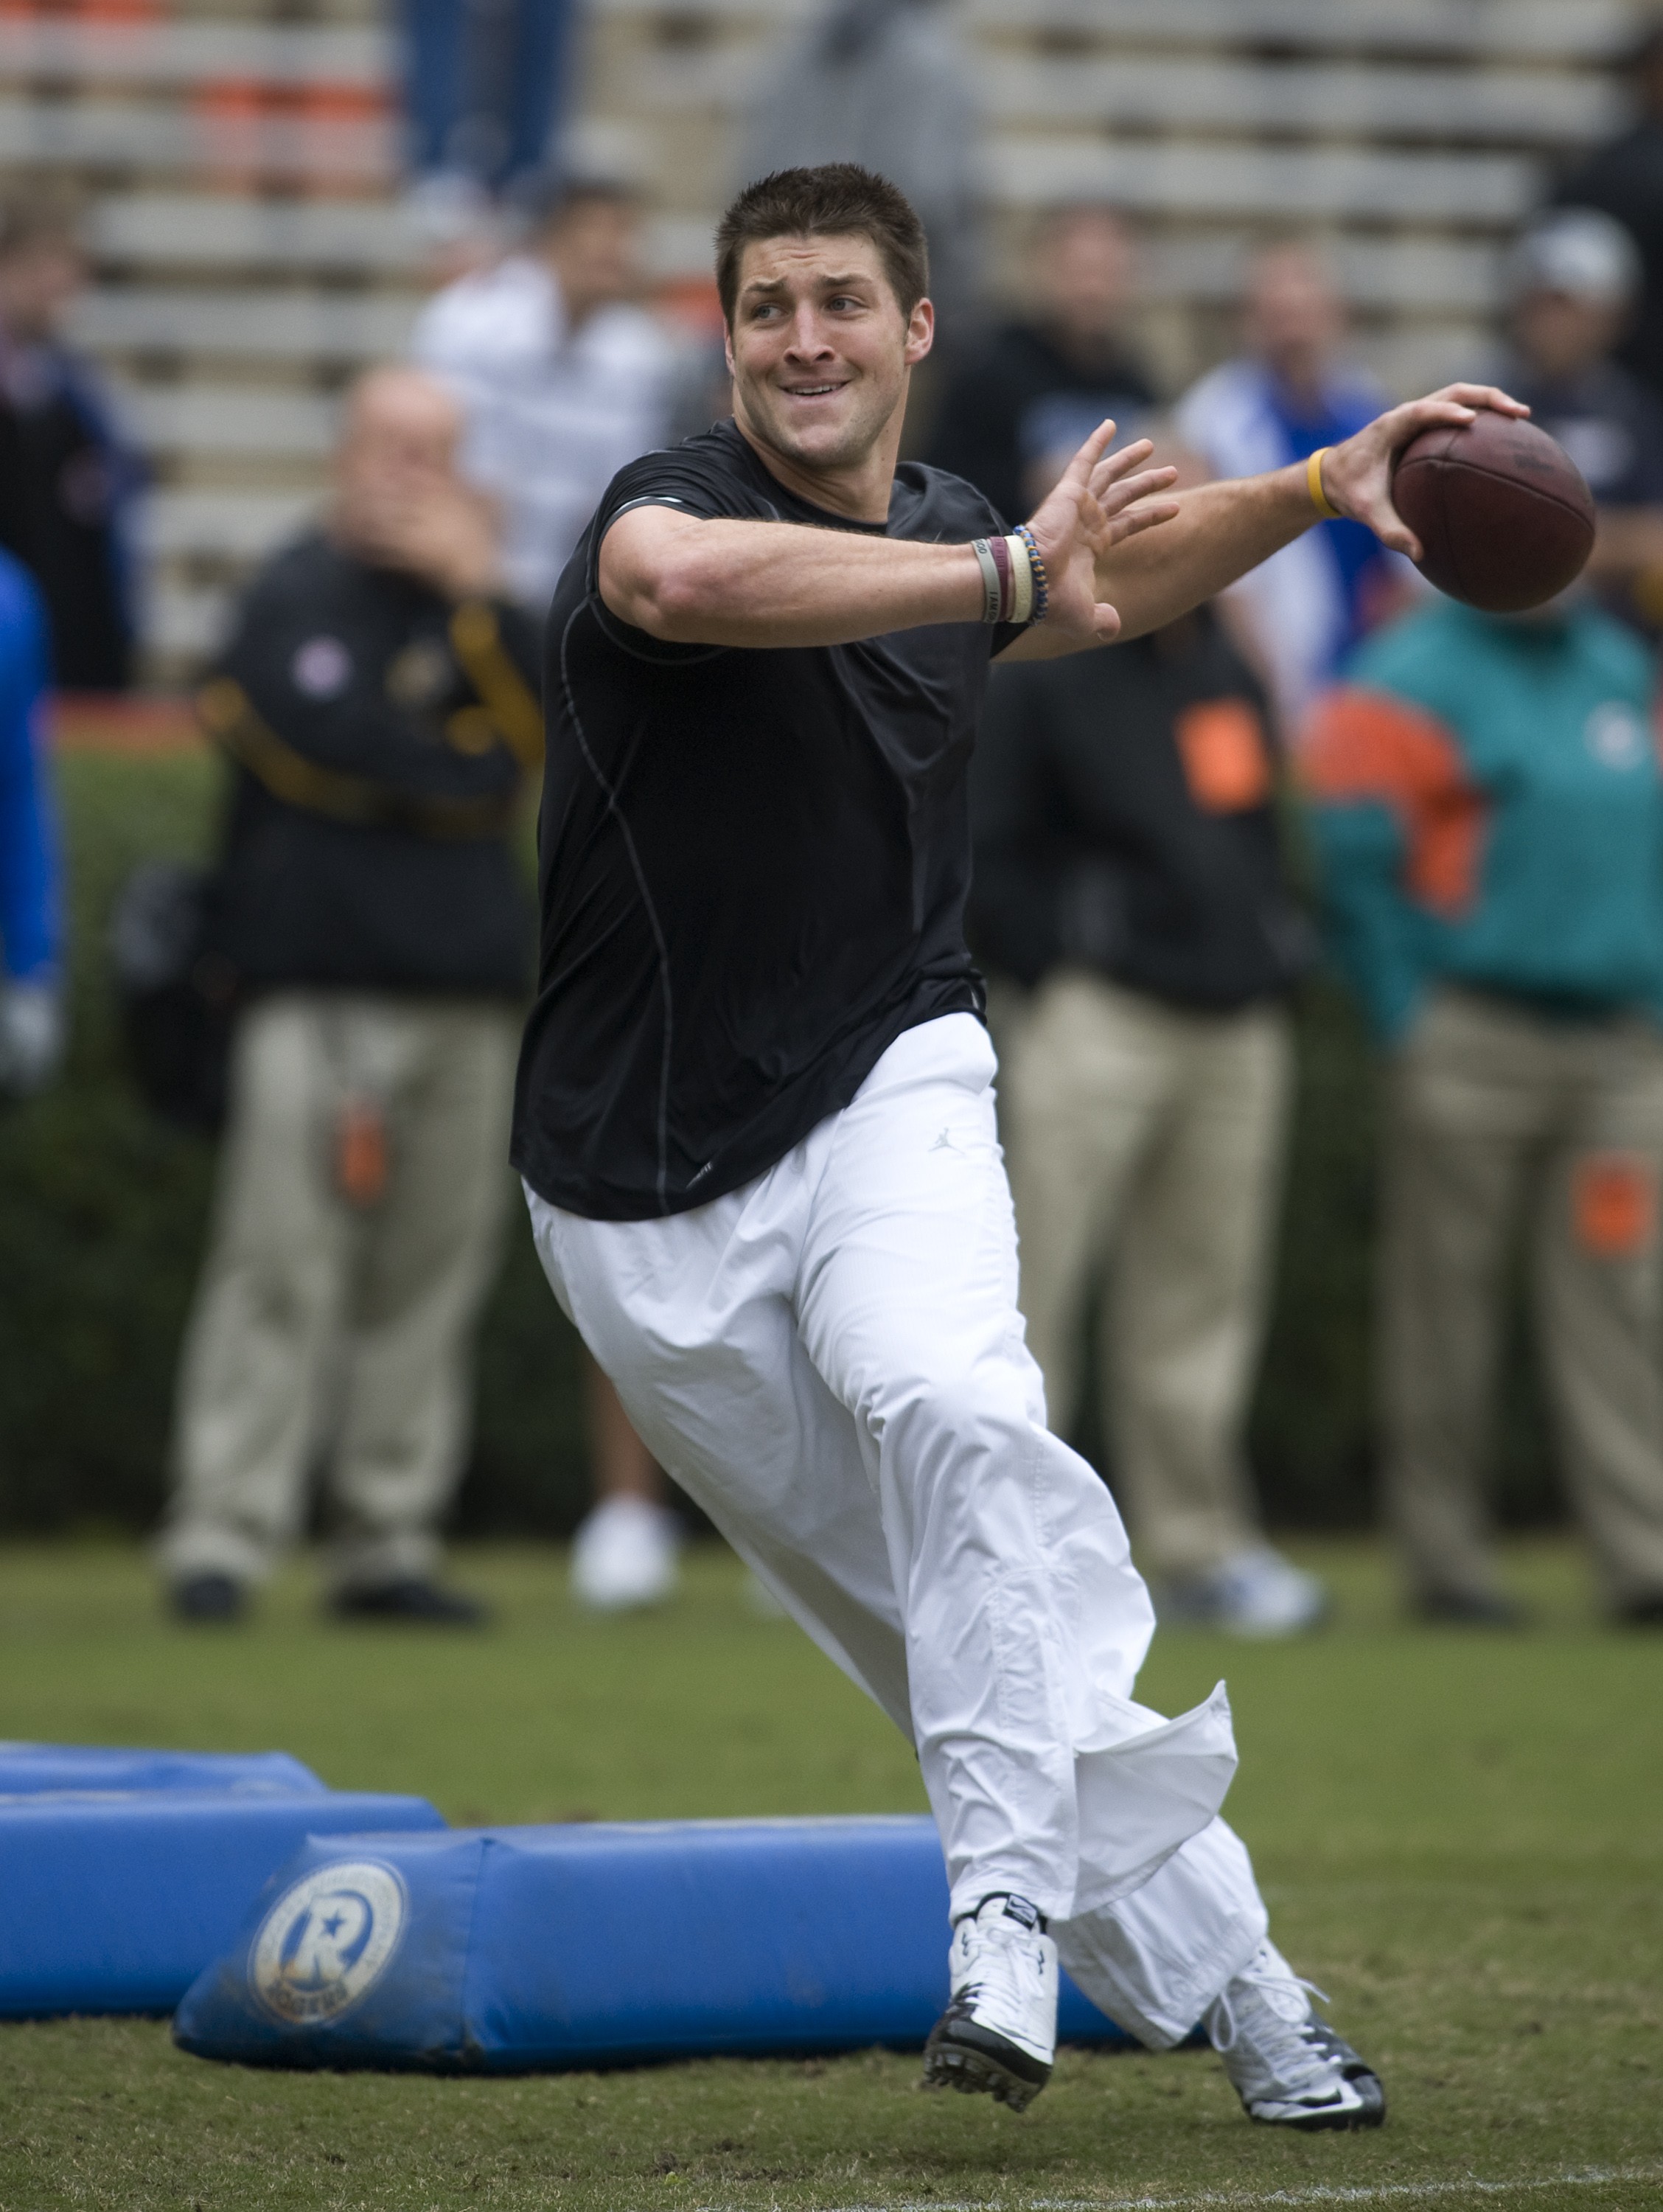 Tebow wows crowd  The Spokesman-Review